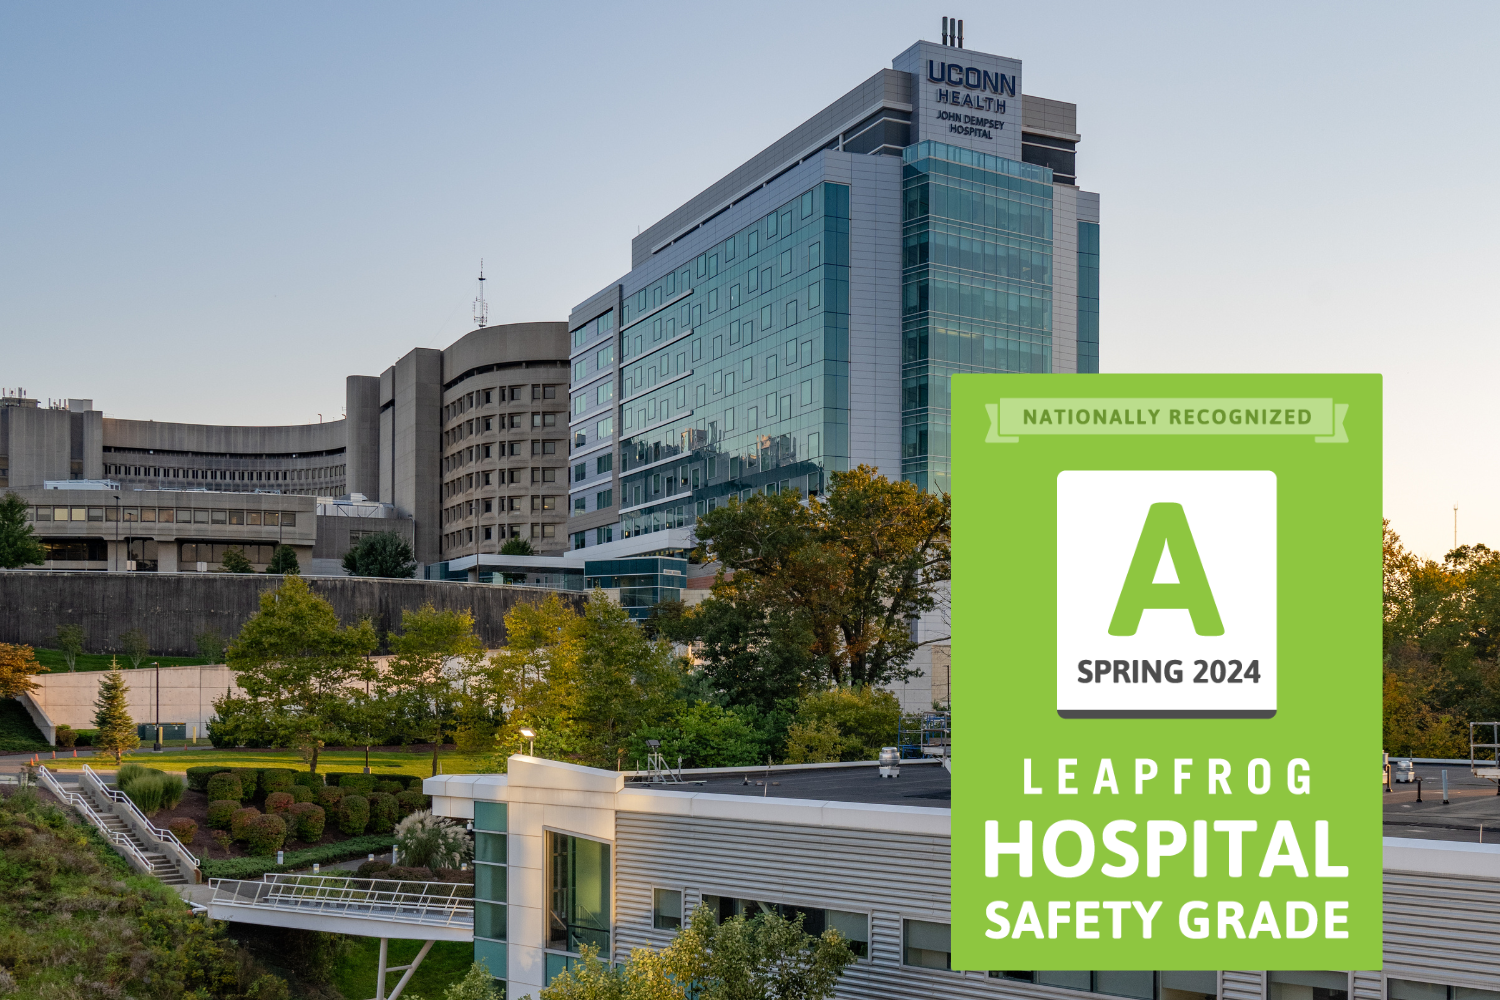 Leapfrog A rating for top patient safety.